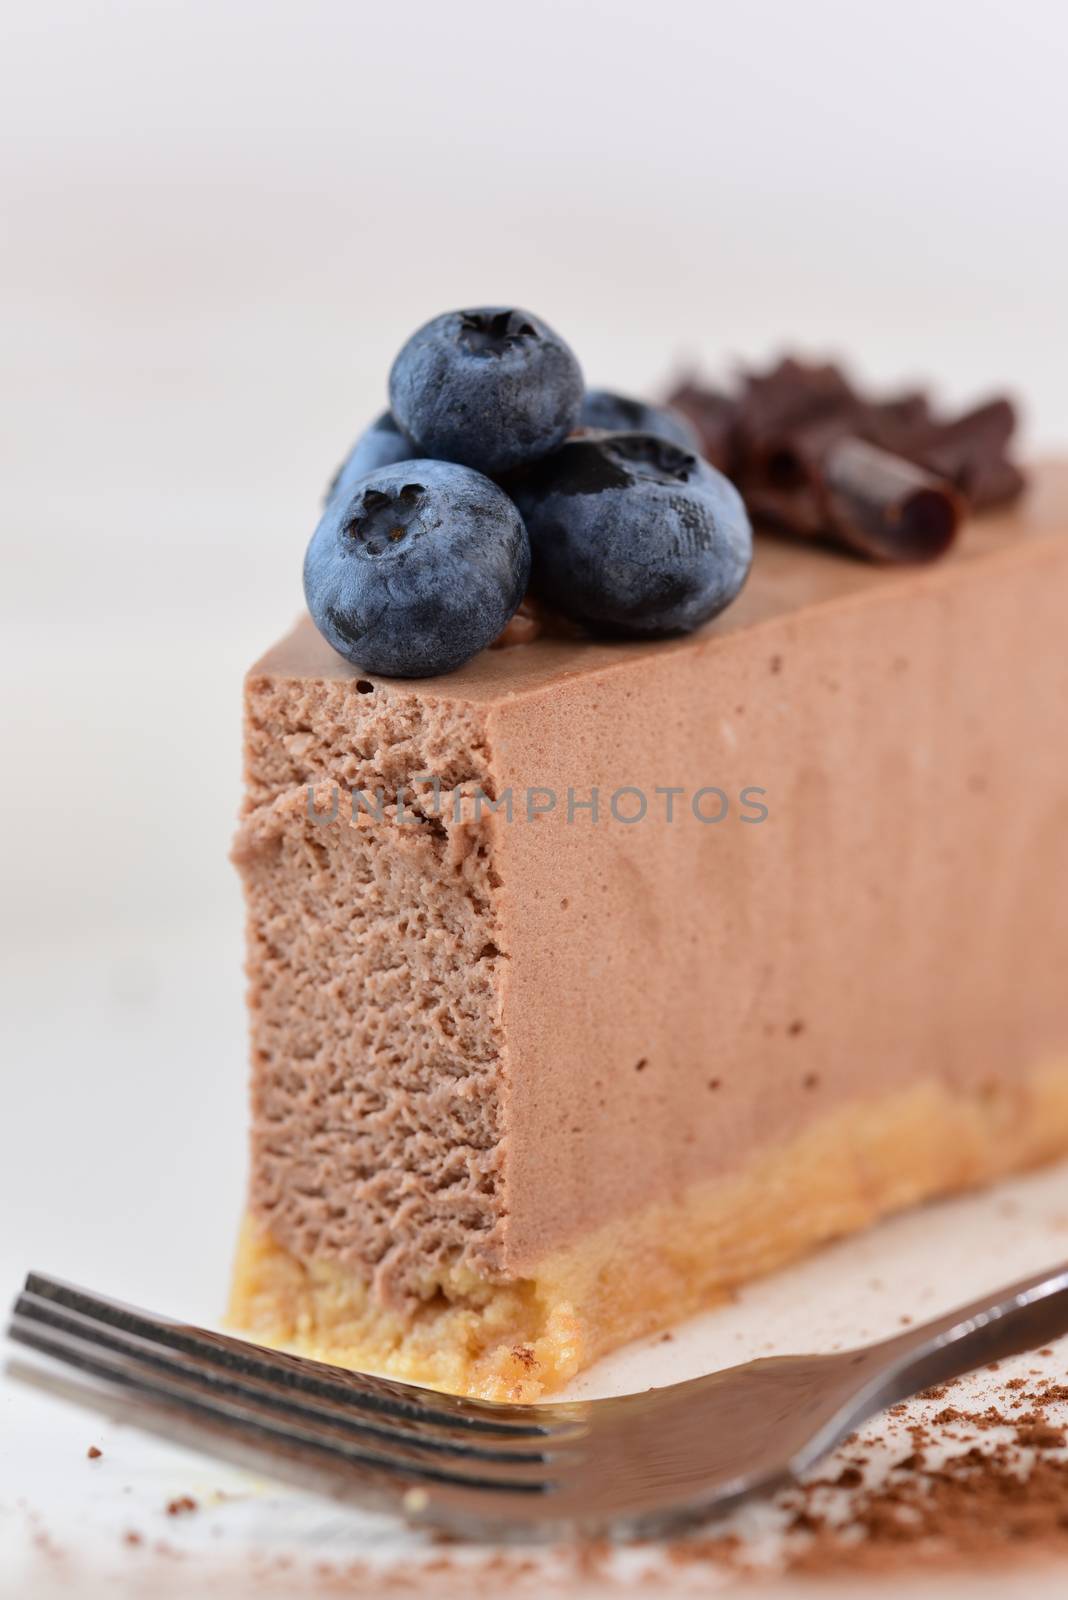 Cheesecake with berries by Visual-Content